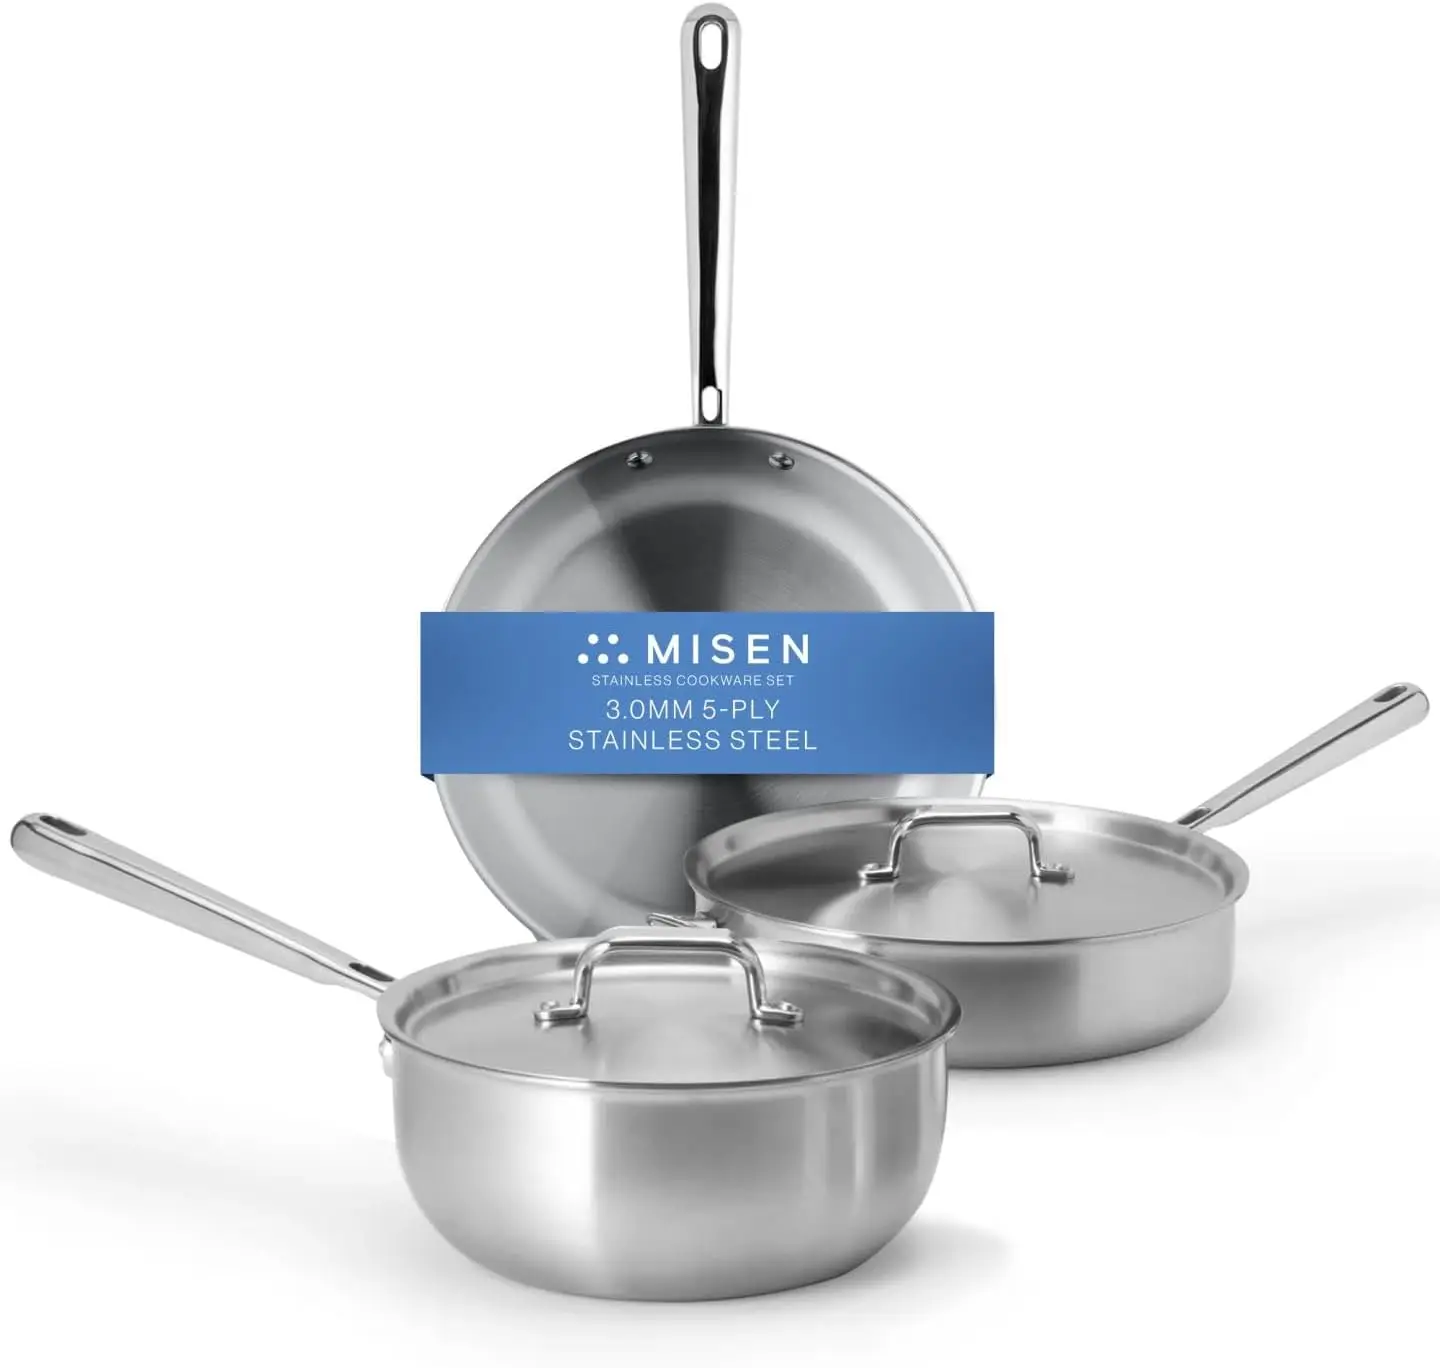 

Misen 5-Ply Stainless Steel Cookware Set: 3 QT Stainless Steel Saucier with Lid, 3 QT Saute Pan with Lid & 10" Frying Pan